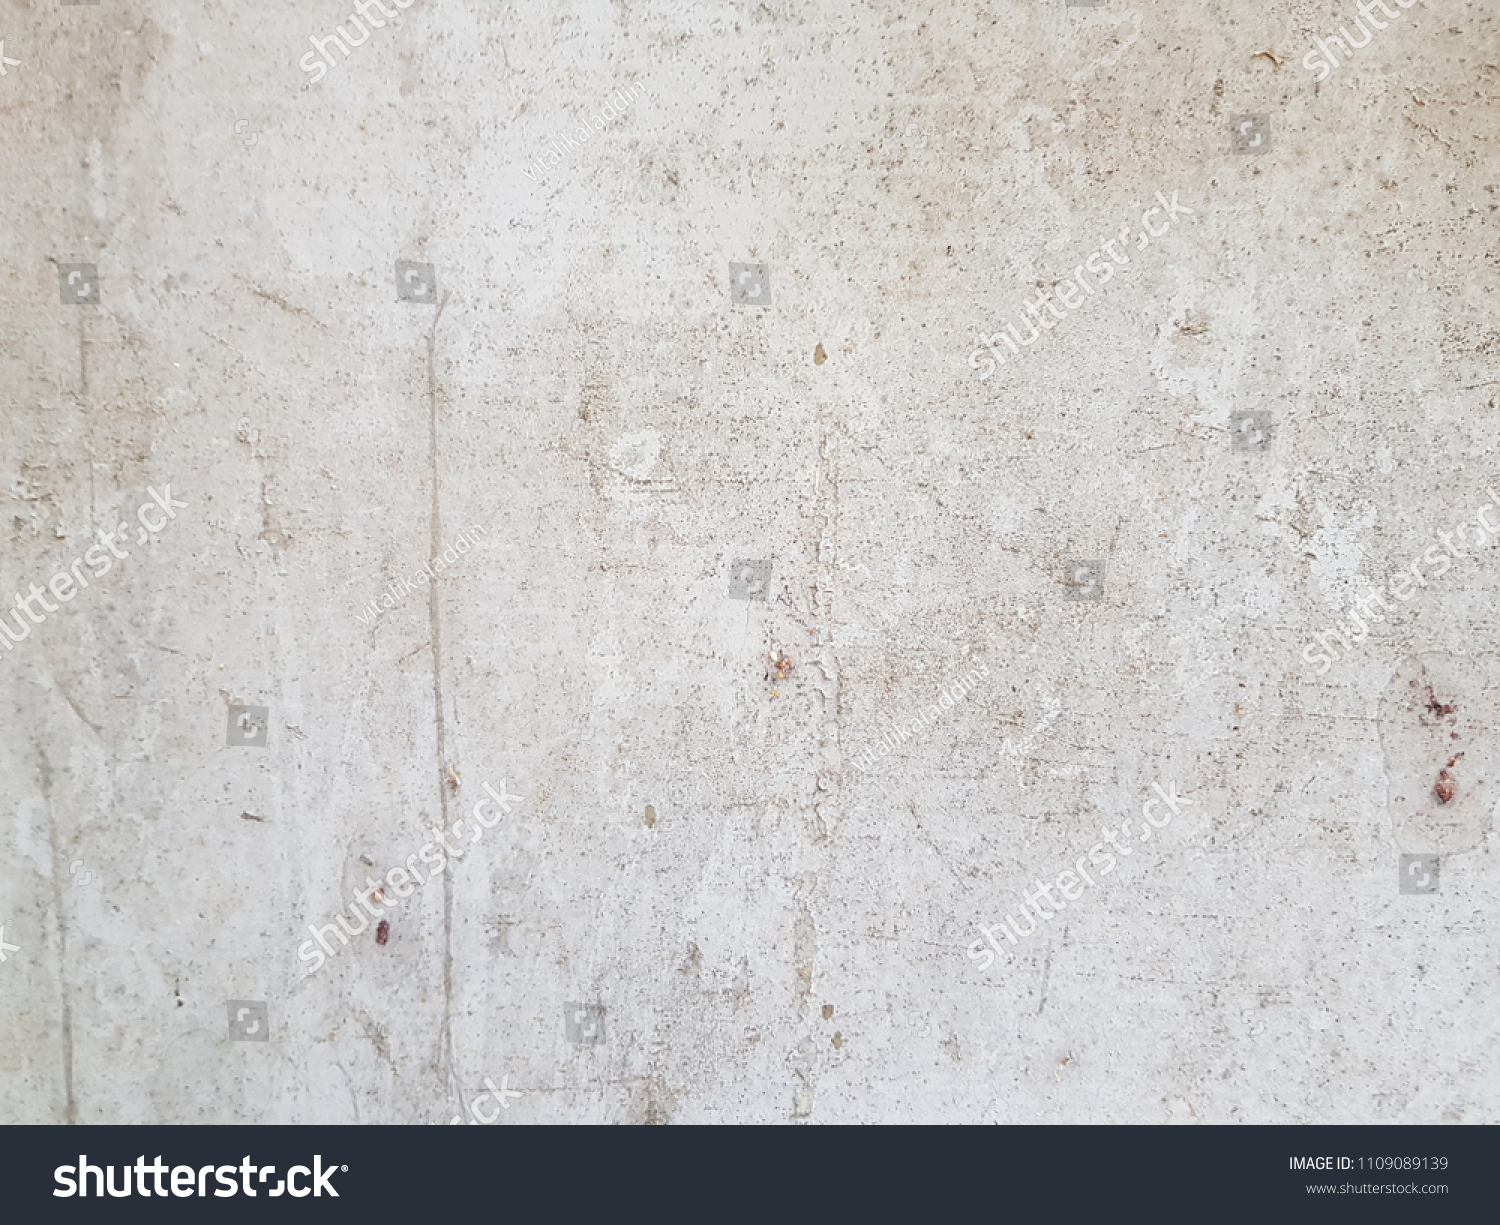 Concrete vintage wall background,old wall #1109089139